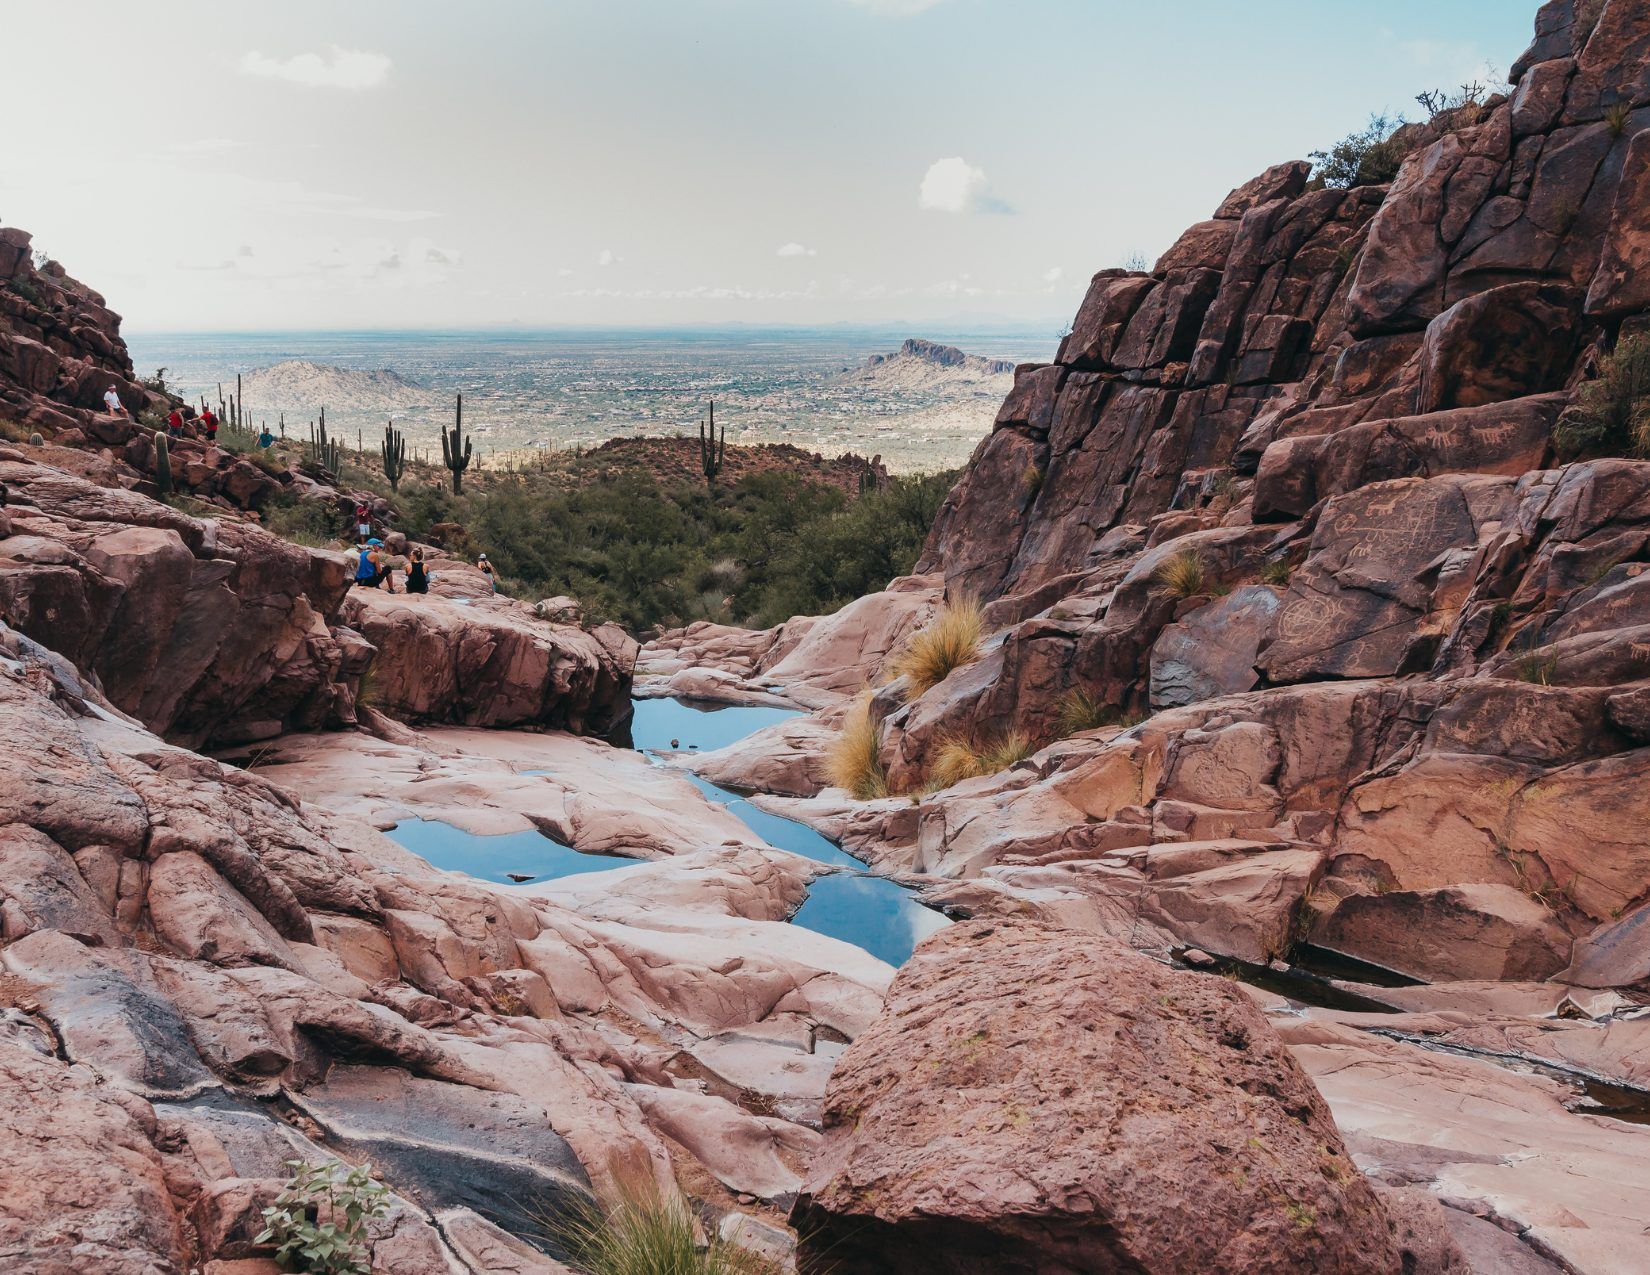 Hikers sitting on Red Rock formations on the Hieroglyphic Trail in Arizona